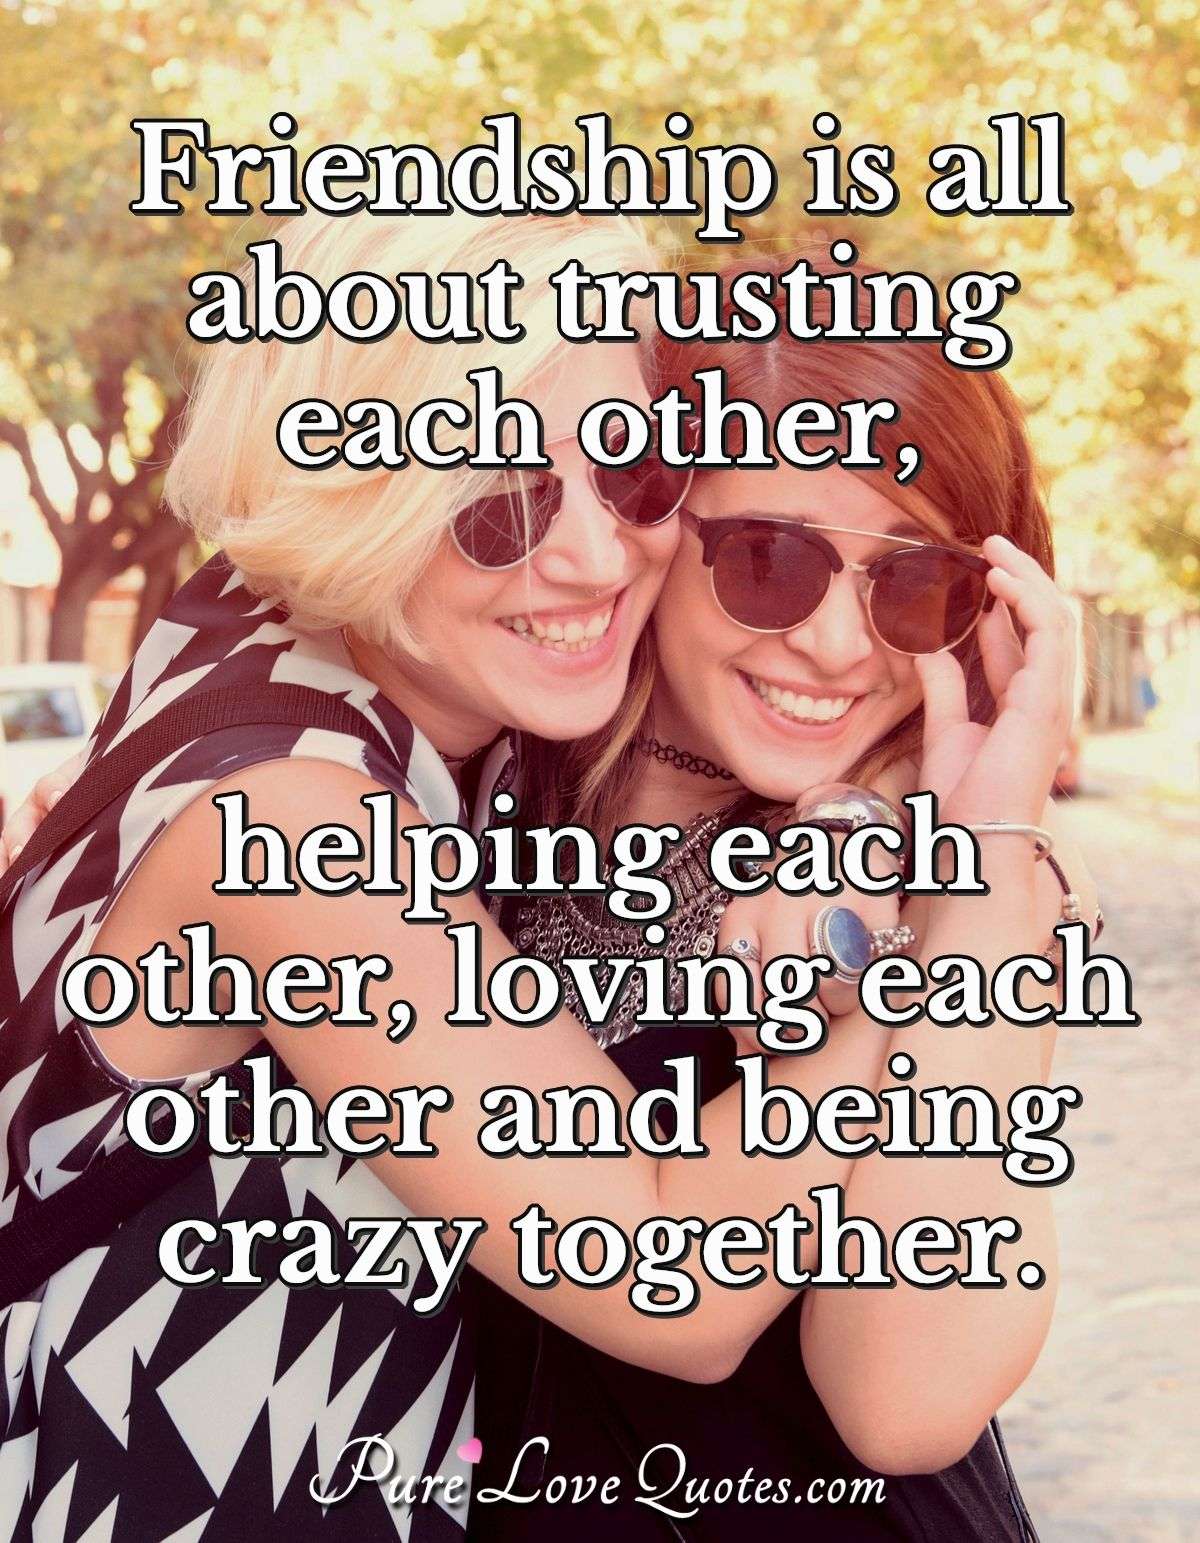 Friendship is all about trusting each other, helping each other, loving each other and being crazy together. - Anonymous